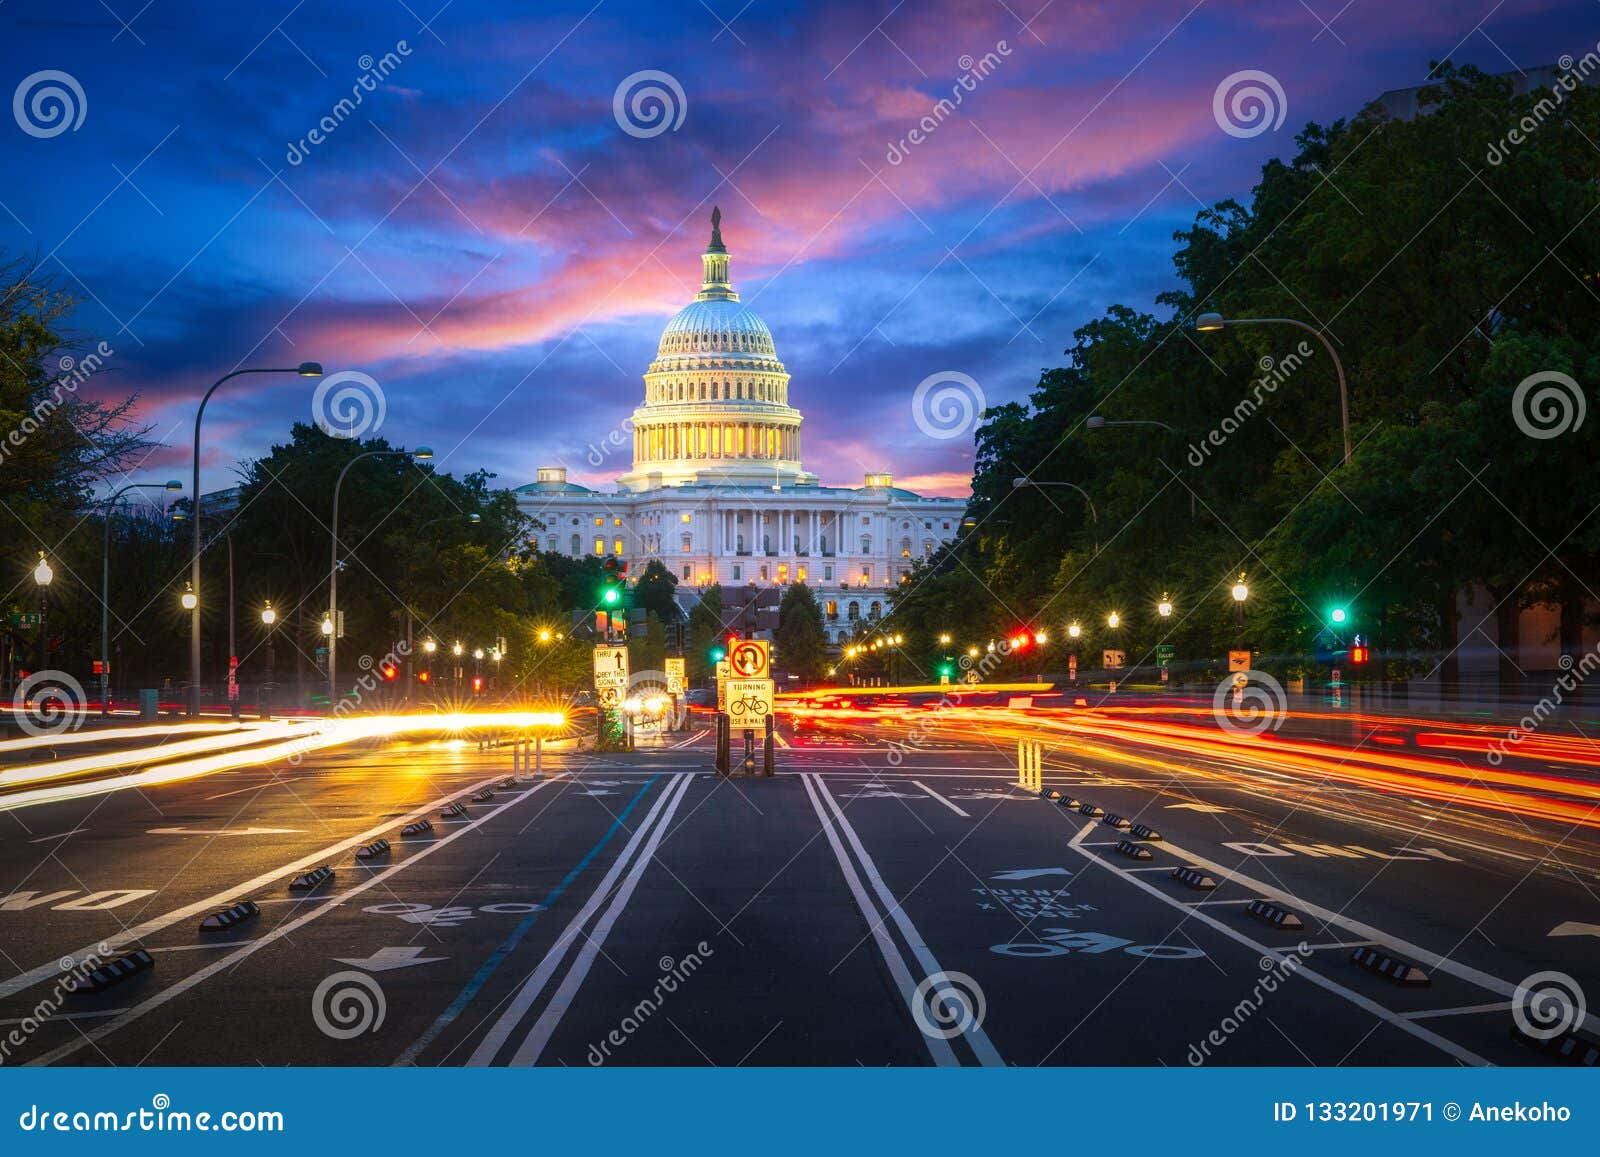 capital building in washington dc city at night wiht street and